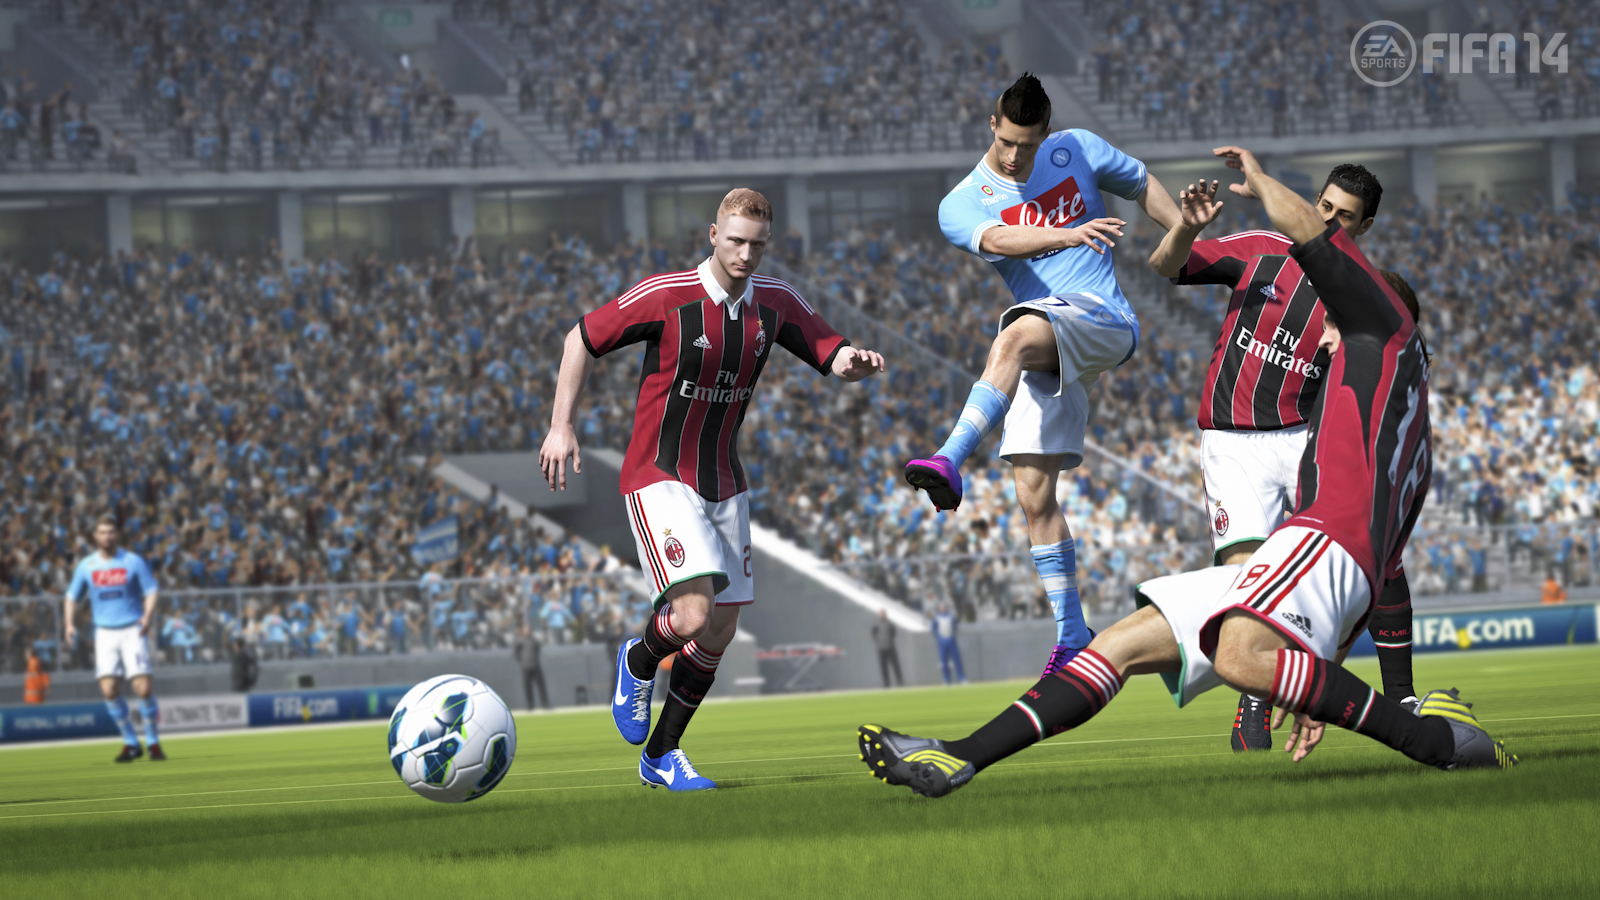 Media asset in full size related to 3dfxzone.it news item entitled as follows: EA Sports annuncia FIFA 14 e mostra i primi screenshots in-game | Image Name: news19364_FIFA-14-screenshot_1.jpg